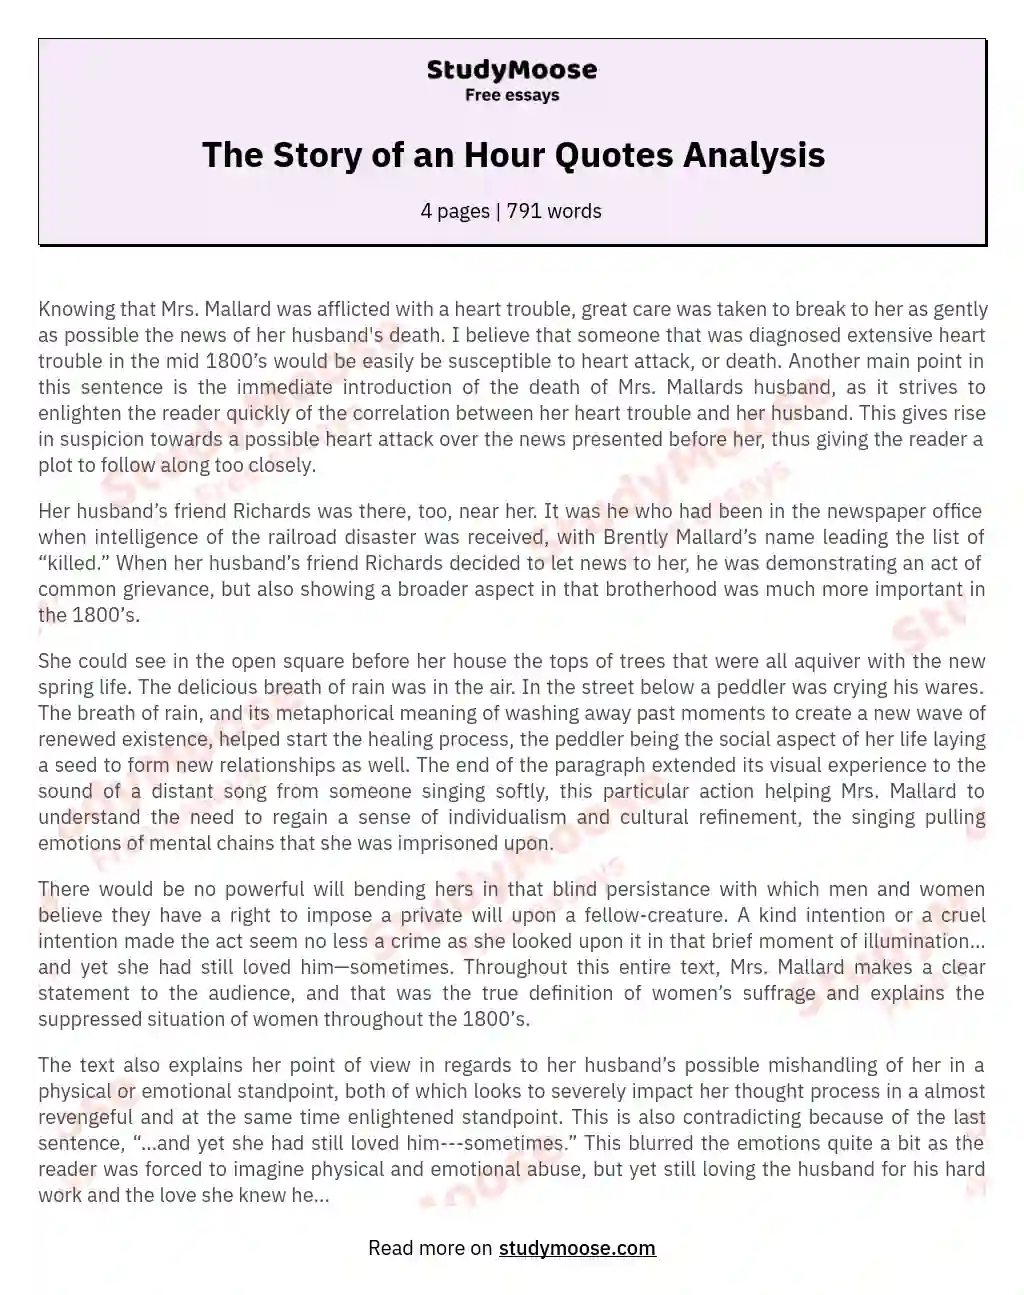 The Story of an Hour Quotes Analysis essay